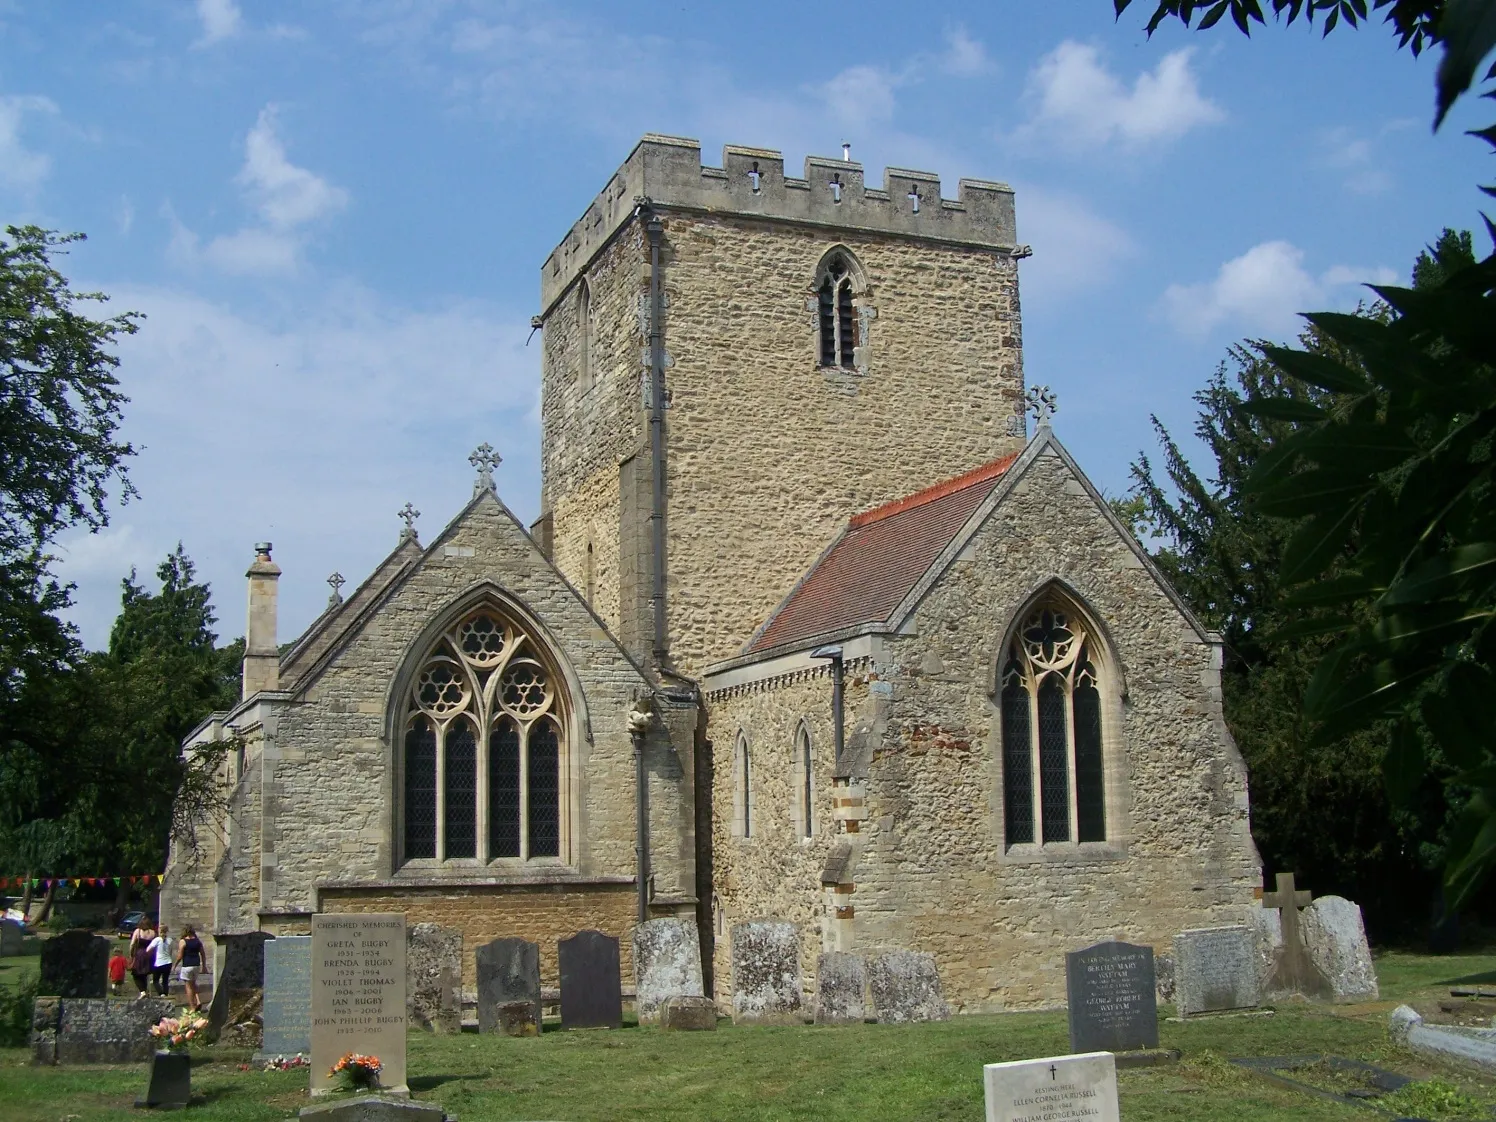 Photo showing: Church of England parish church of St Botolph, Barton Seagrave, Northamptonshire, seen from the southeast